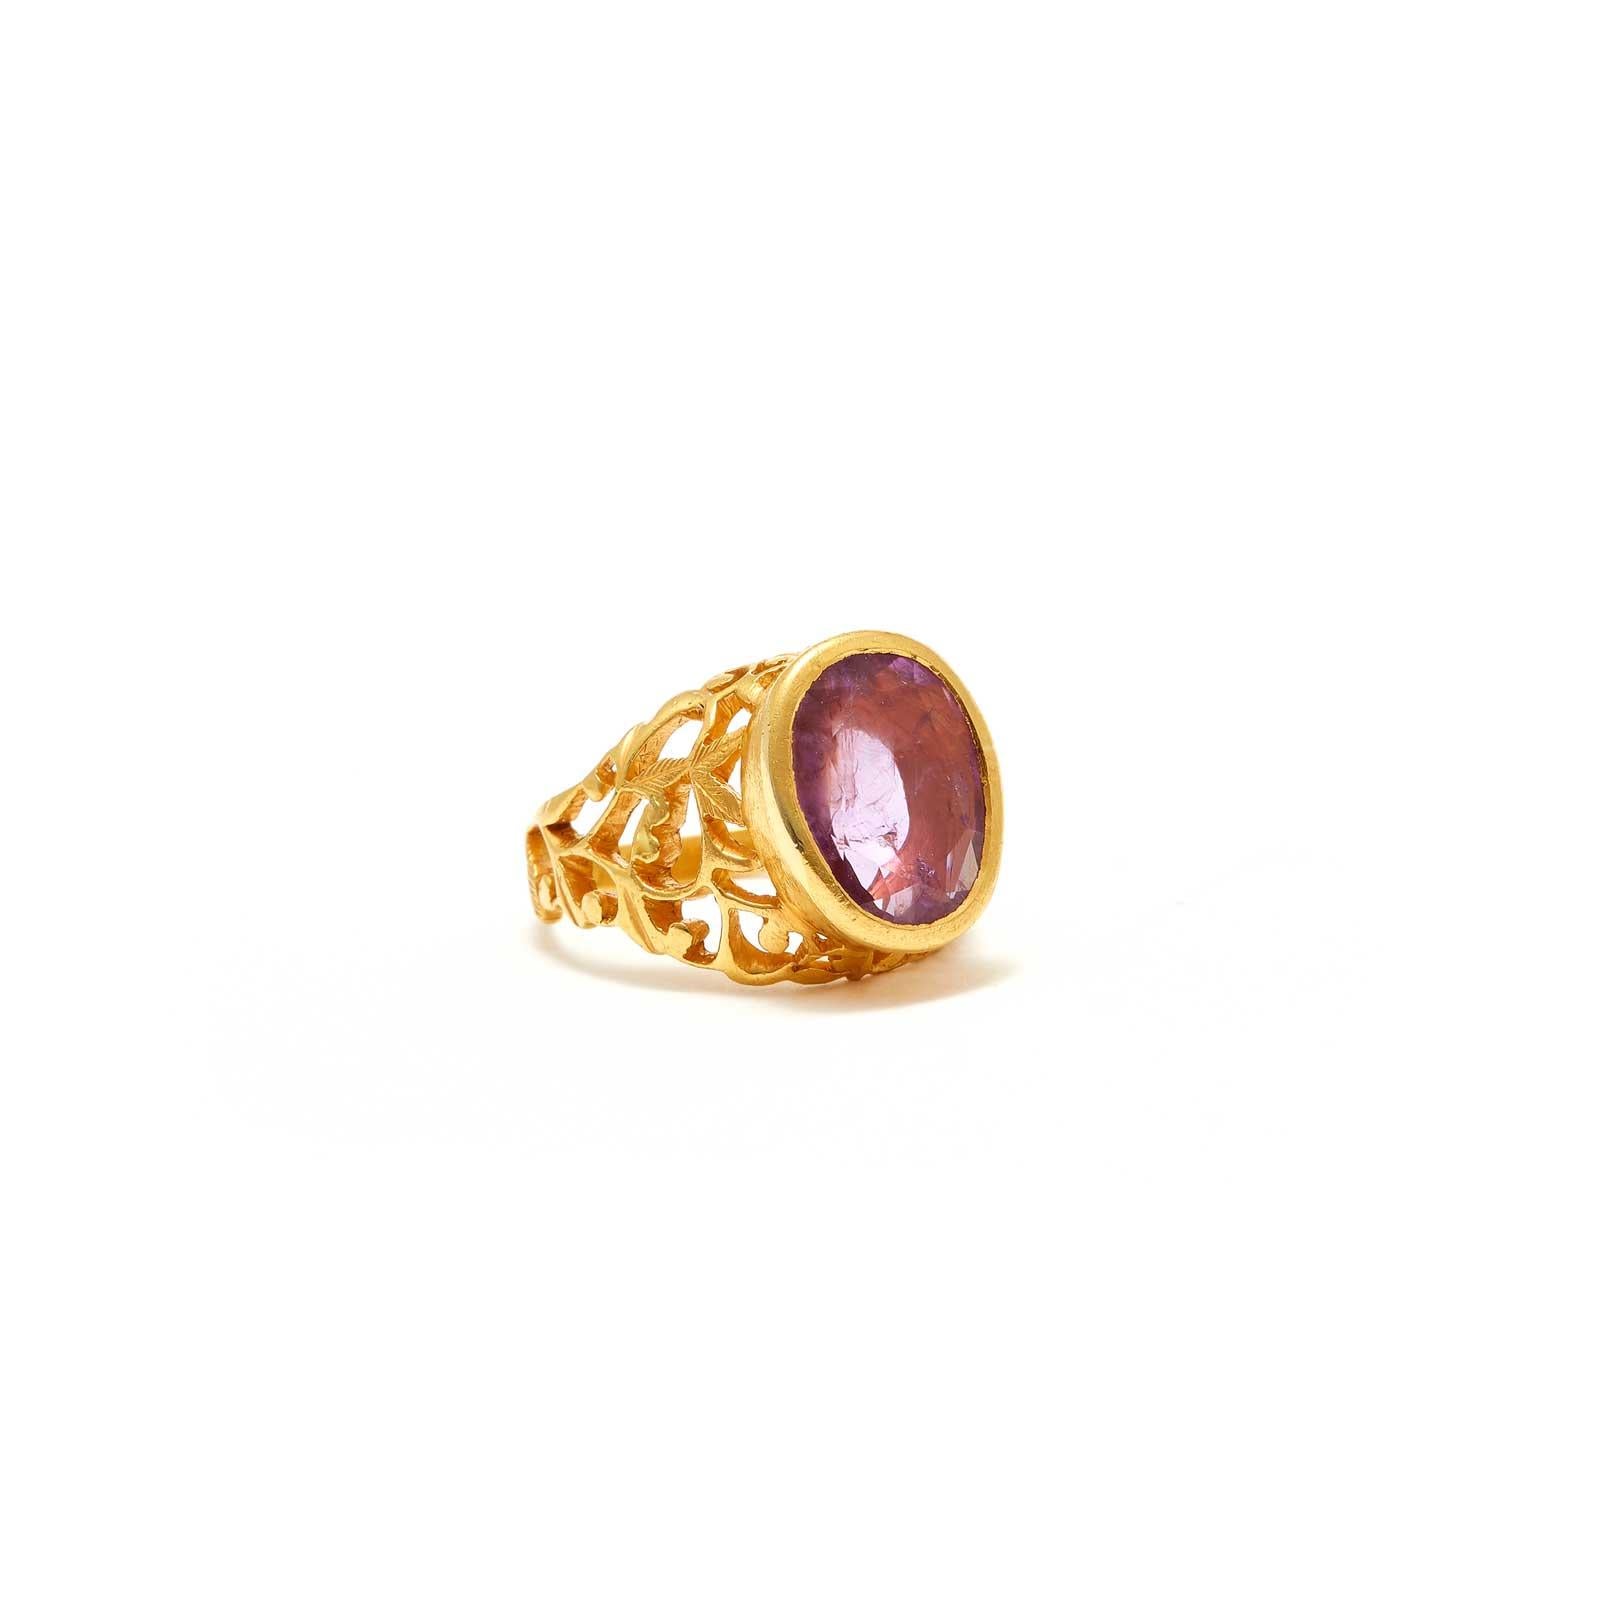 A Gia Certified 4.3 Karat Natural Ruby RIng.
Reflecting upon the luminous quality of this GIA certified 4.3 karat Sri Lankan ruby, one can see for a thousand years... this estate piece is magenta pink with purple undertones, natural and unheated, in